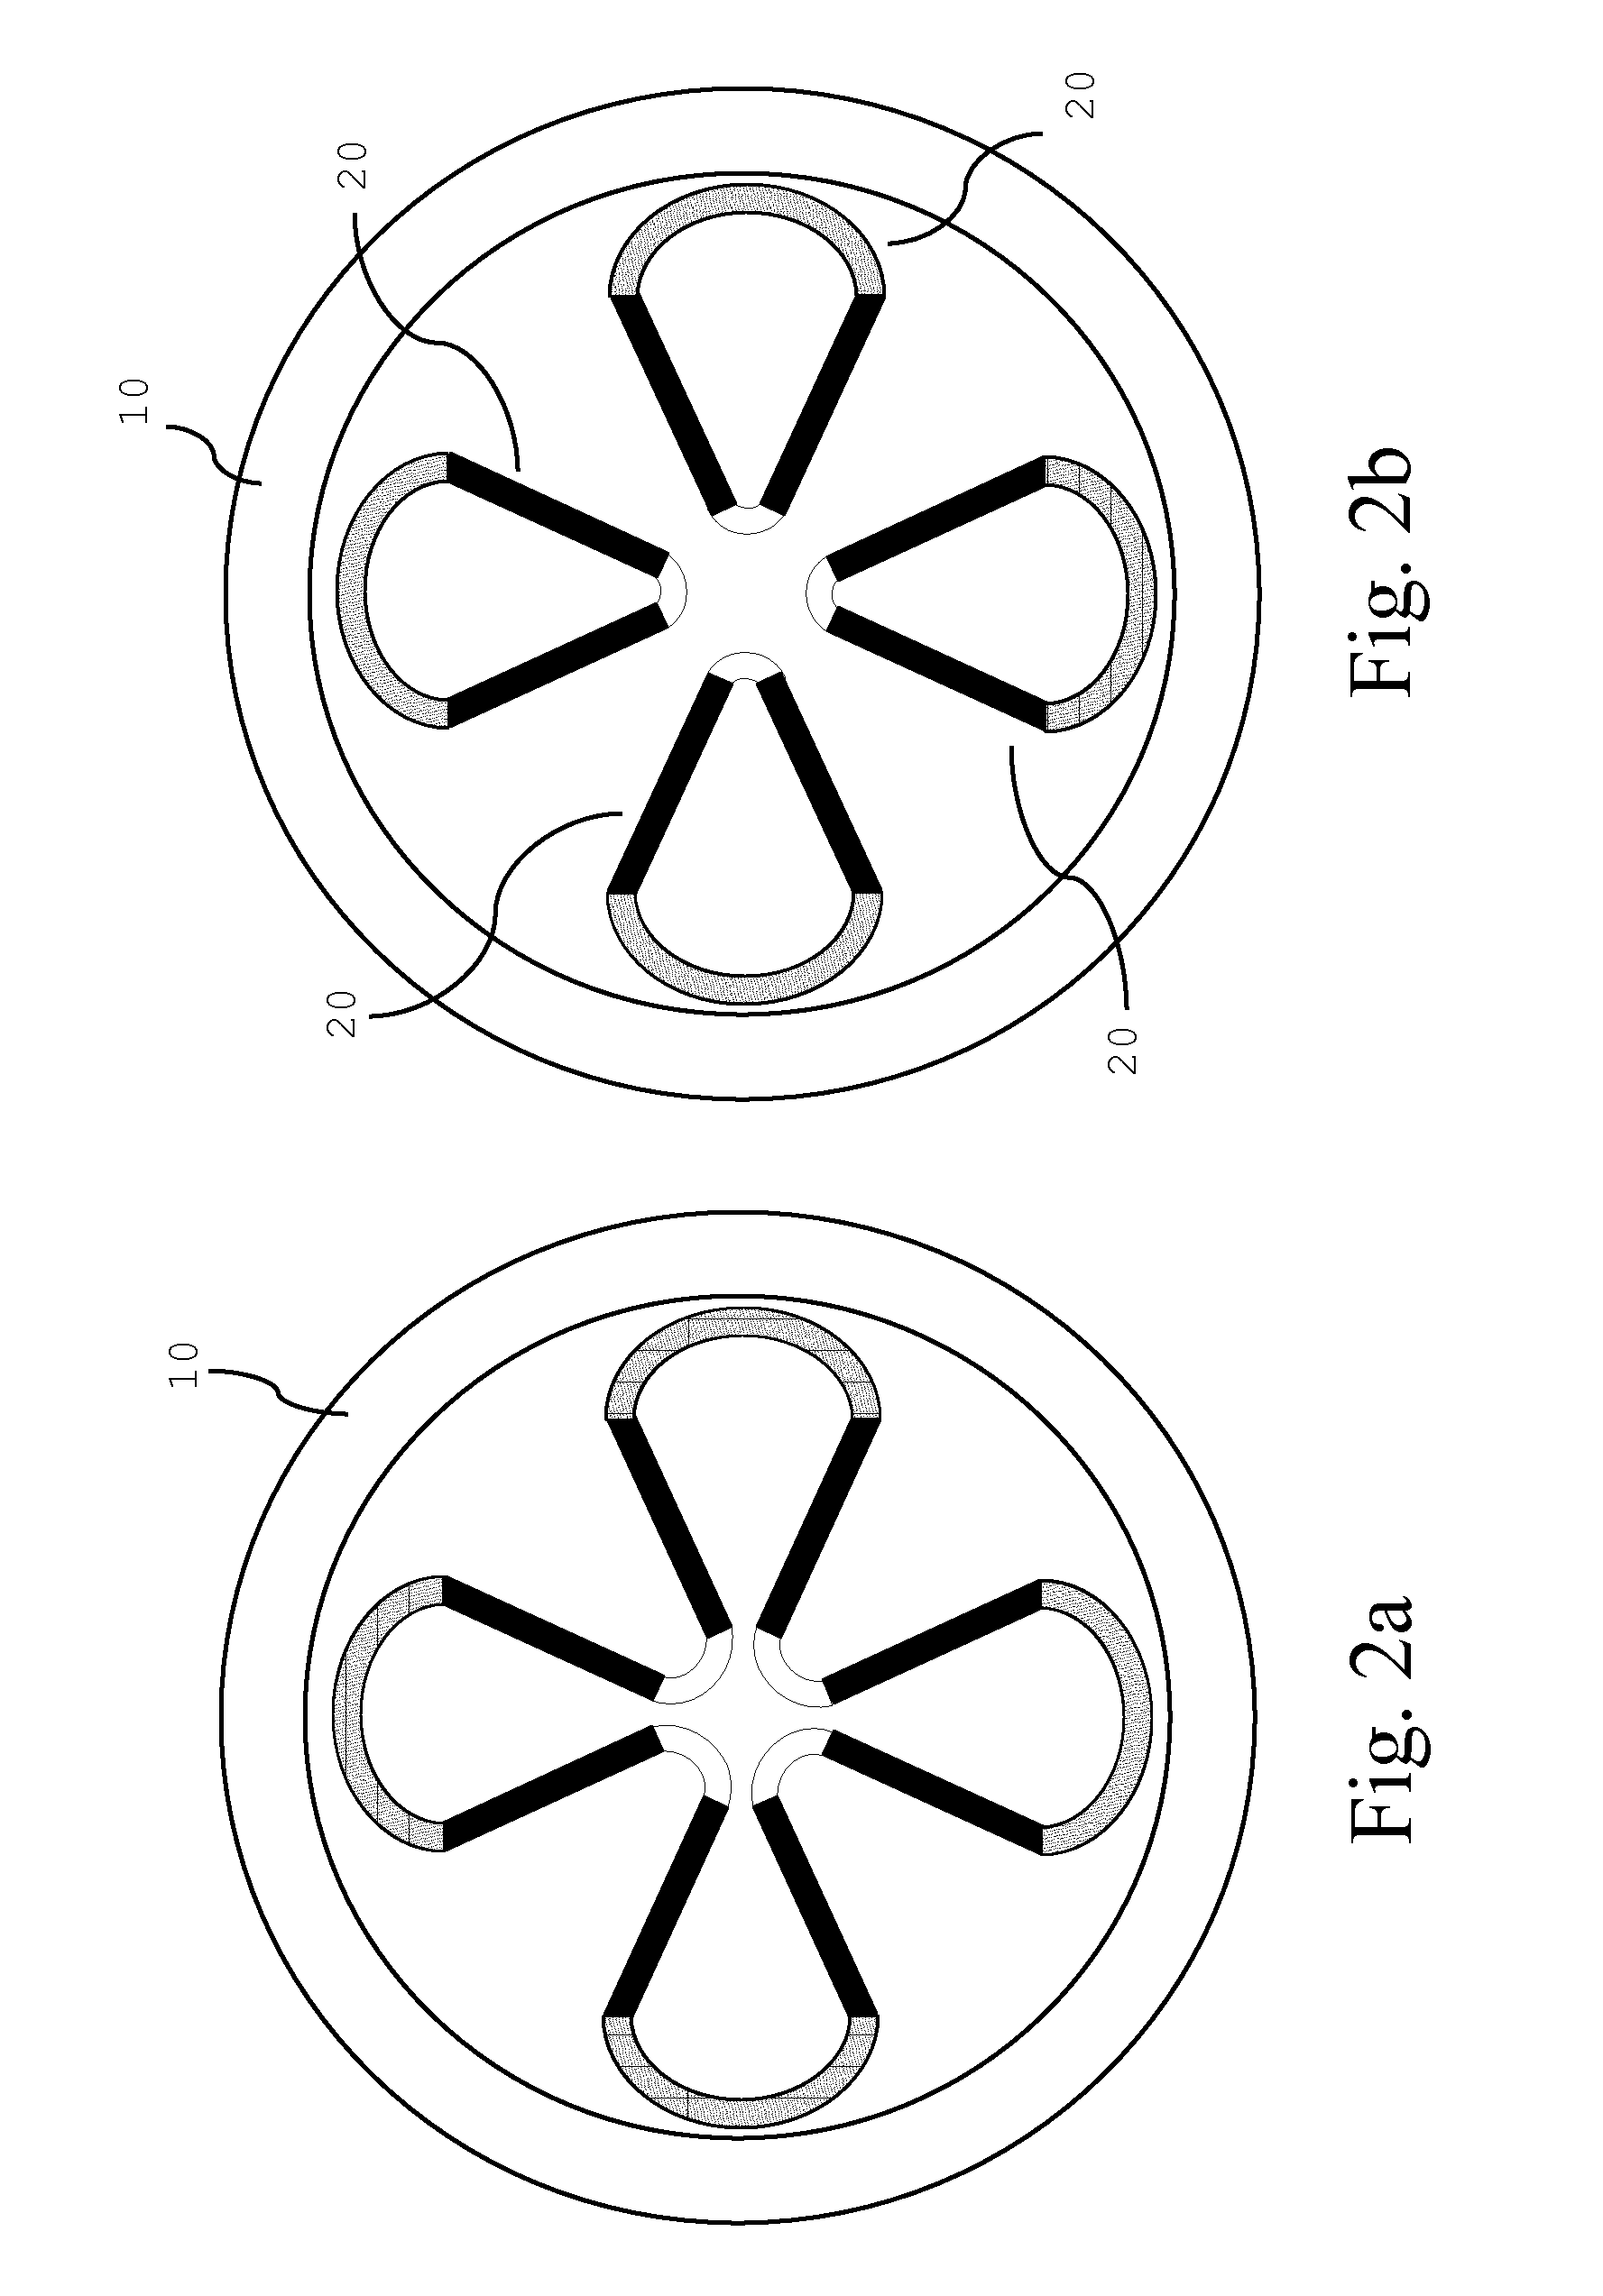 Magnet structure for an isochronous superconducting compact cyclotron